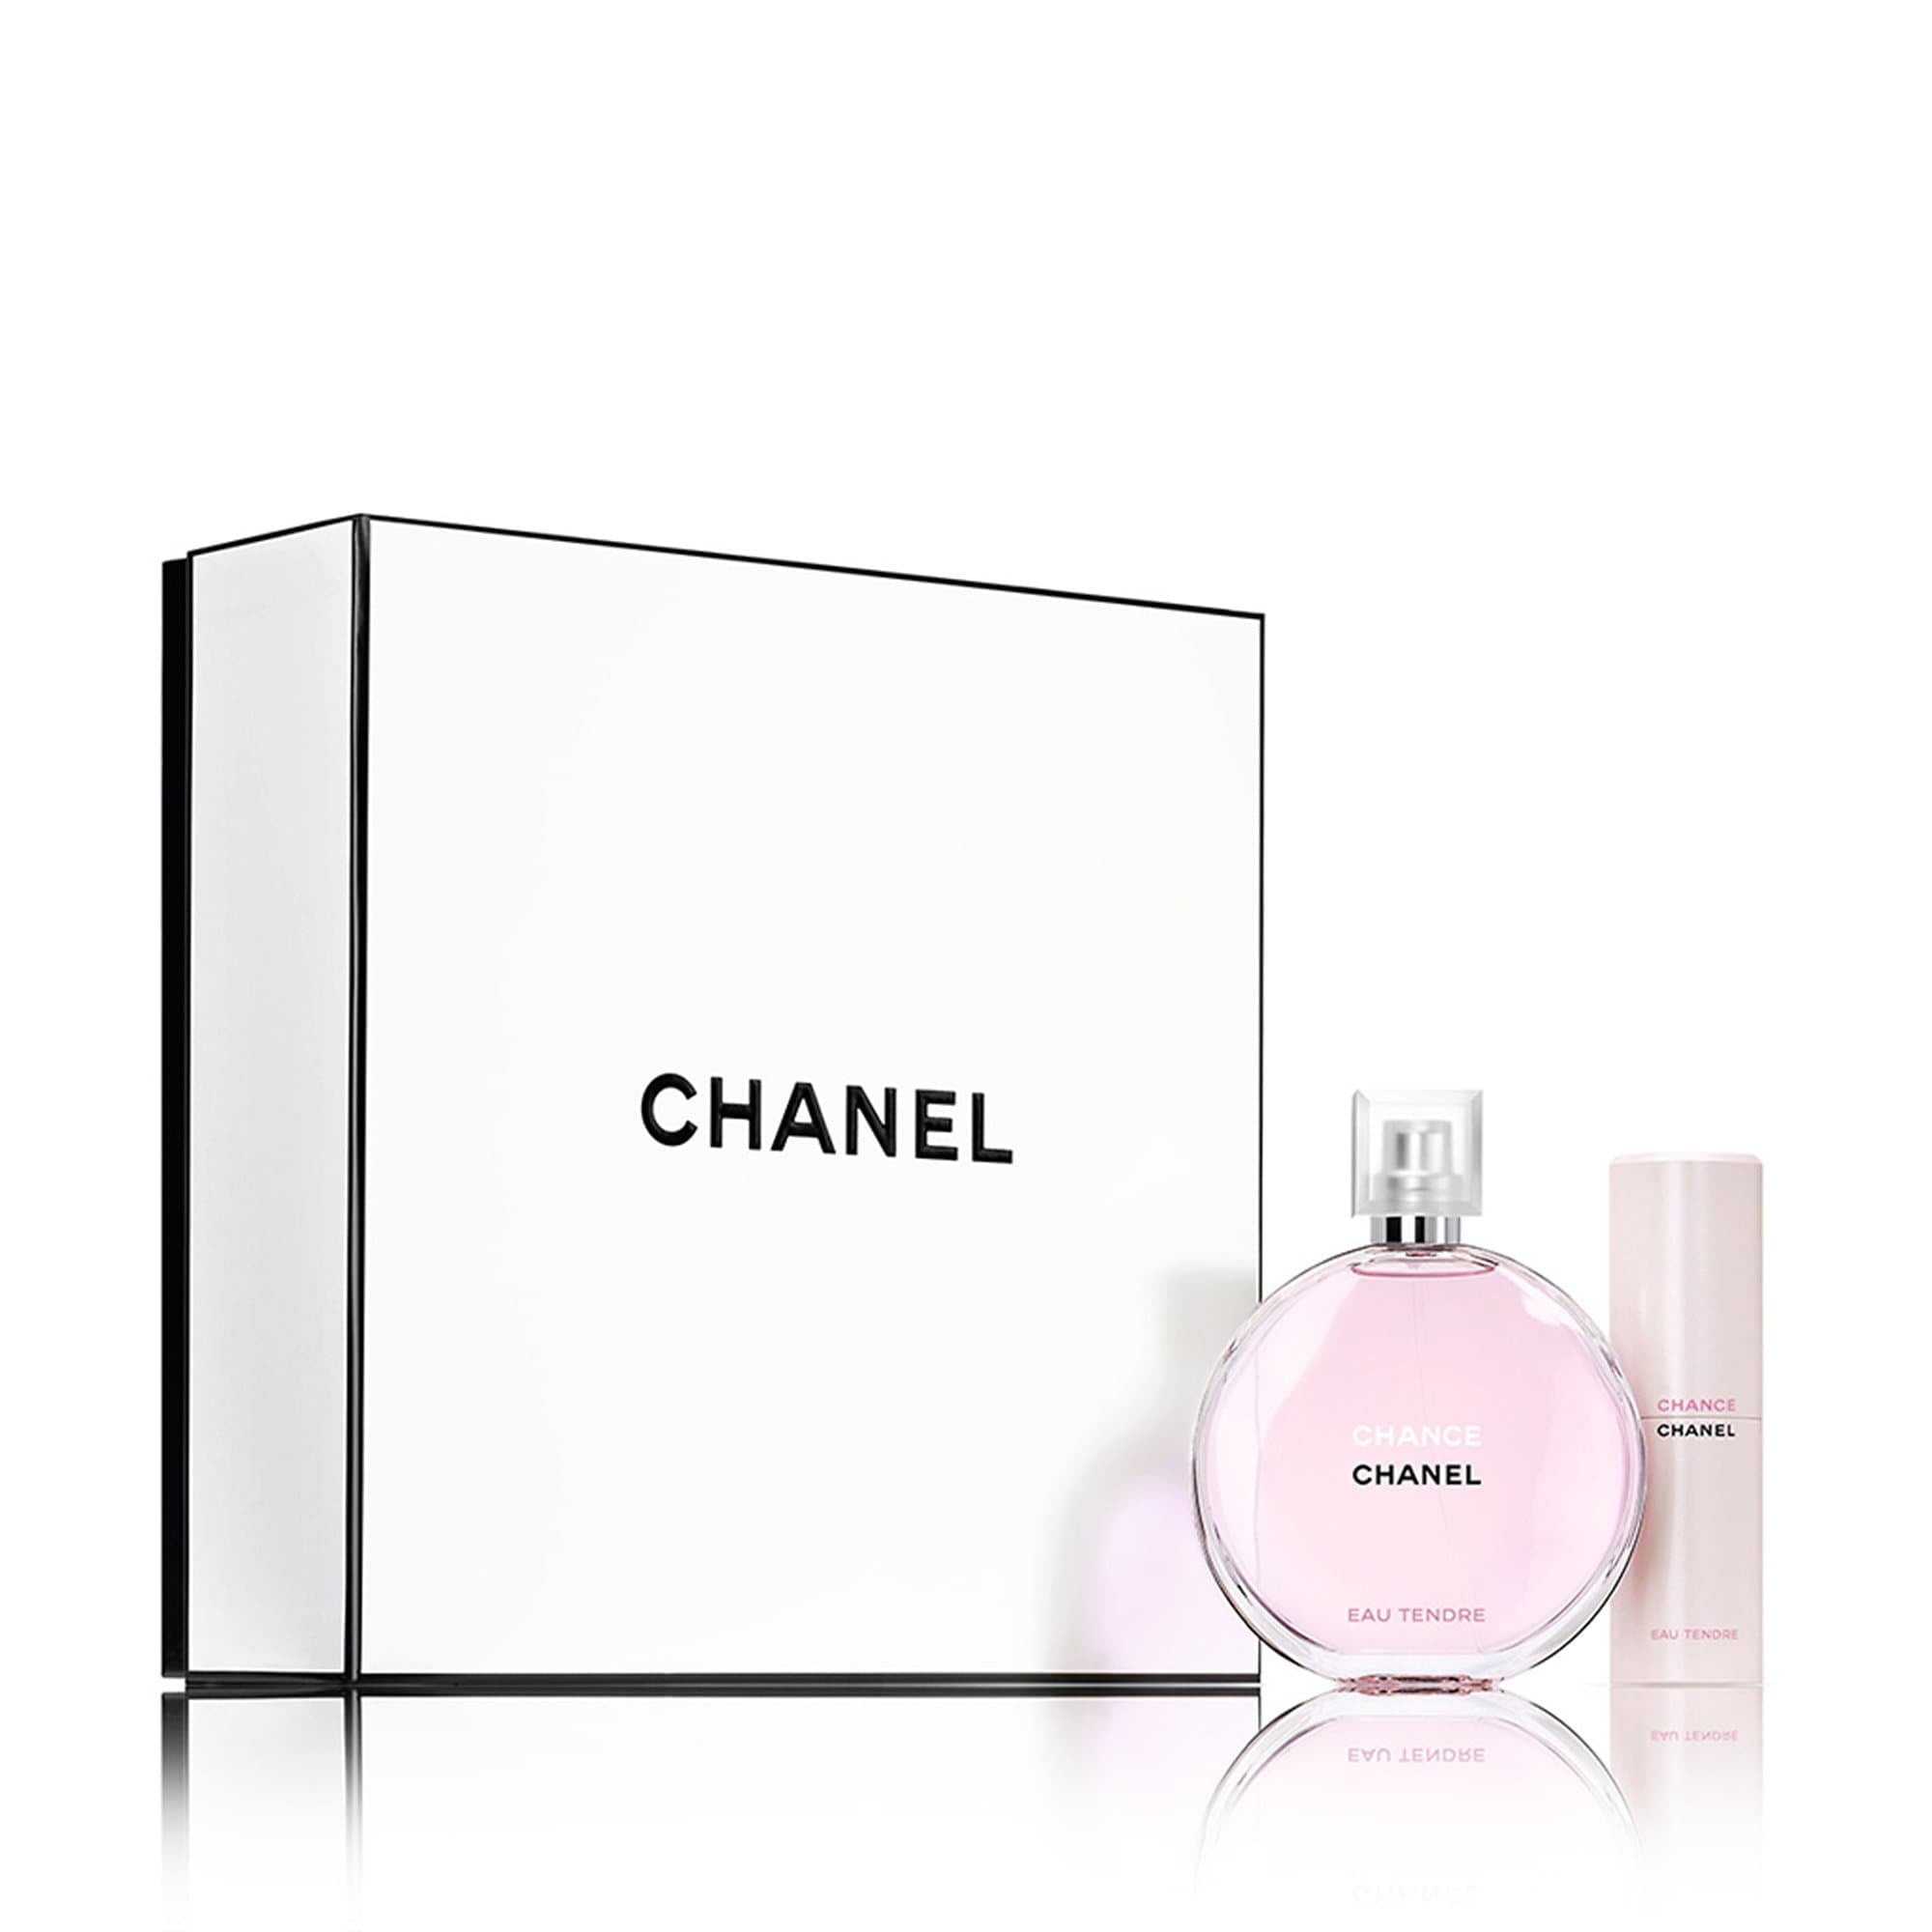 Chanel Chance Eau Tendre Eau de Toilette Travel Gift | These the 15 Fragrance Gifts to Buy This Year | POPSUGAR Beauty Photo 10